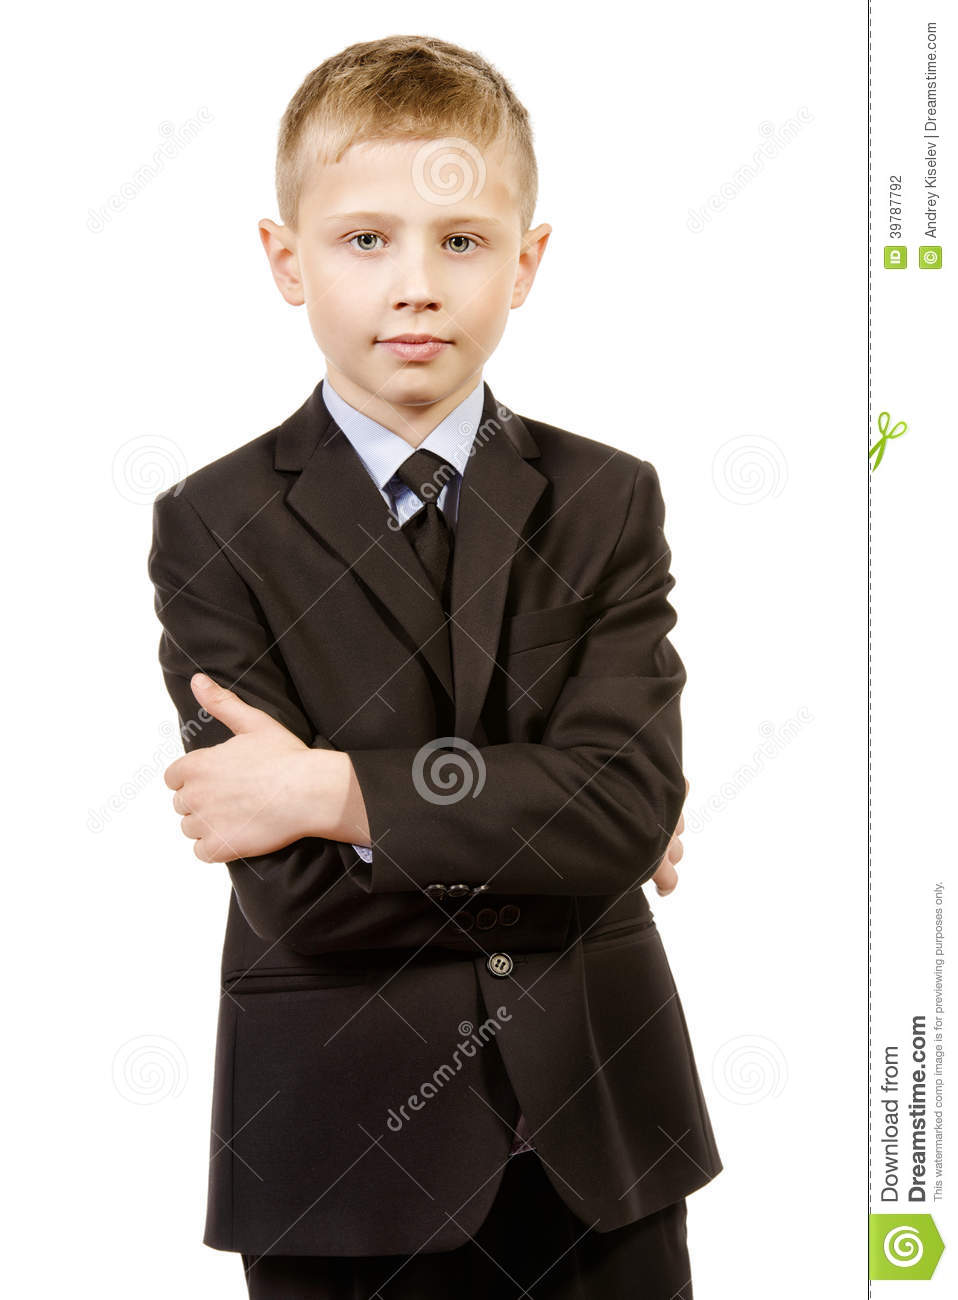 Portrait Of A Boy In School Uniform  Isolated Over White 